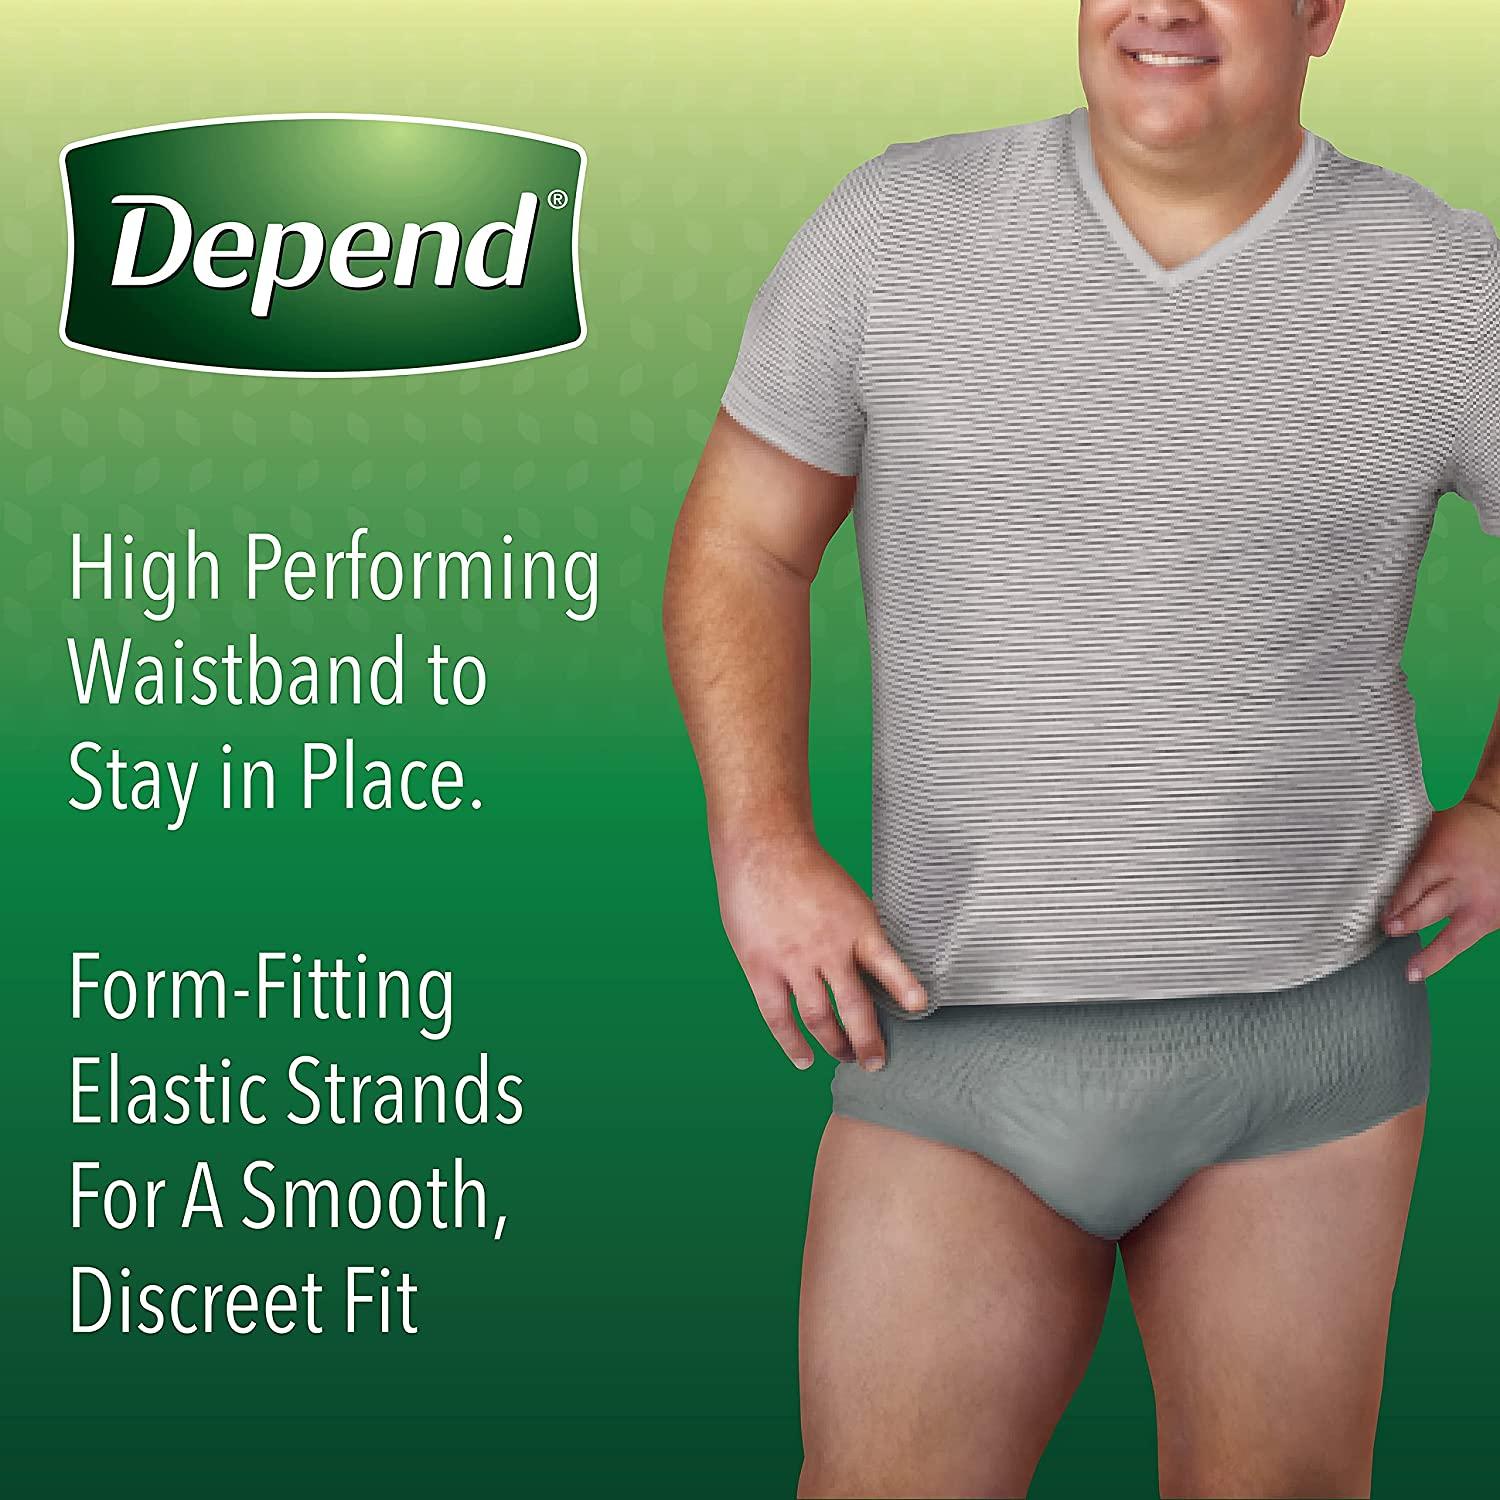 Depend Real Fit Adult Incontinence Underwear for Men, Maximum Absorbency,  L/XL, Black & Grey, 12 Count, Health & Personal Care